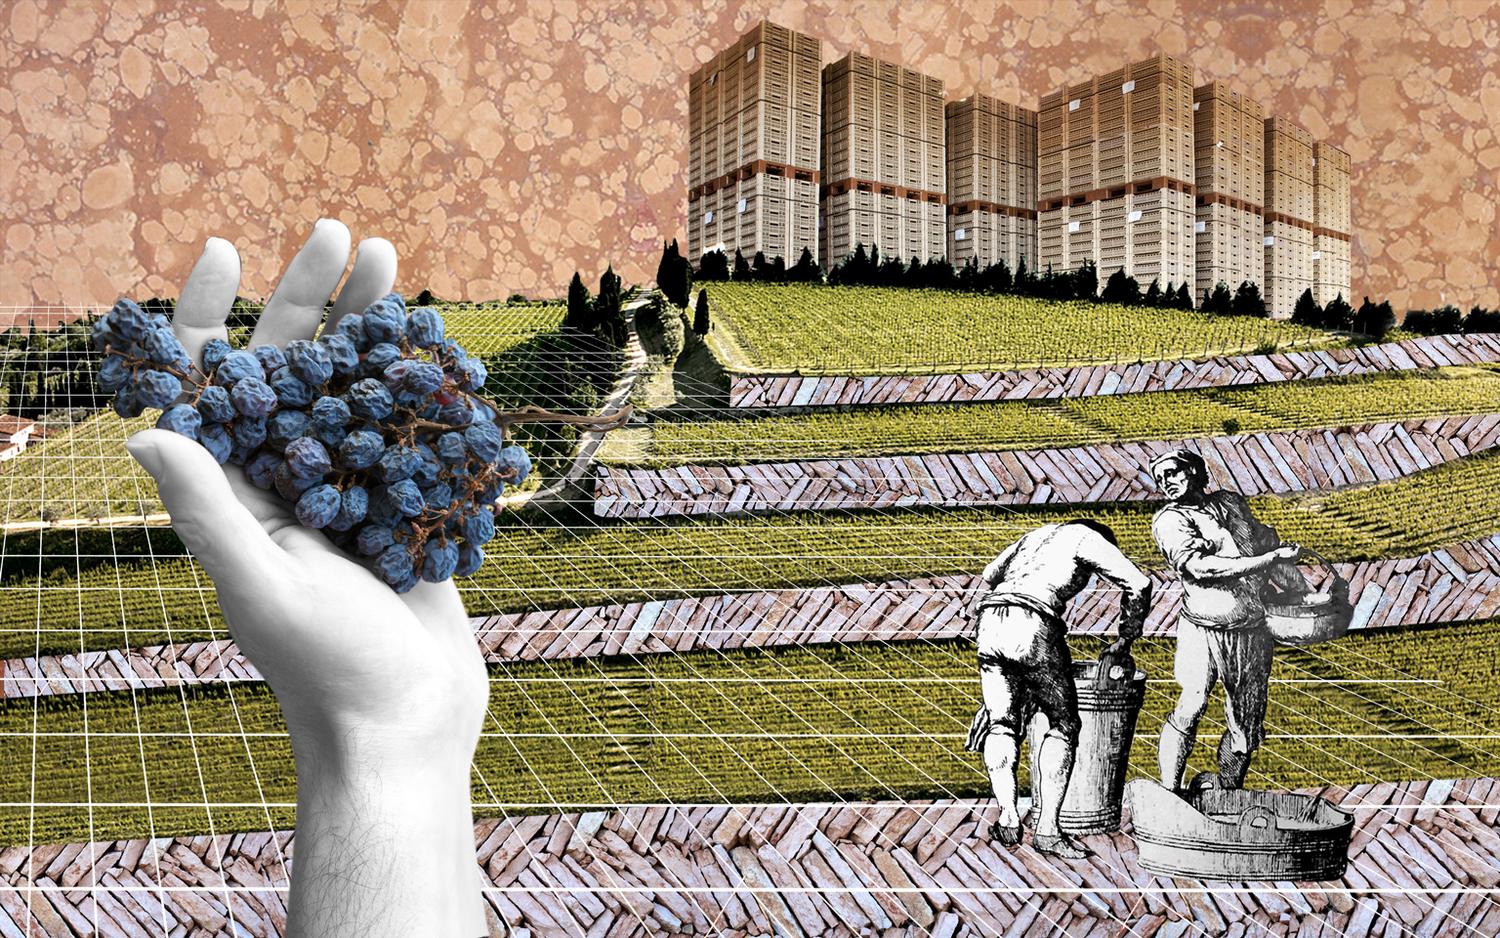 digital collage of wineries, terraces and grapes